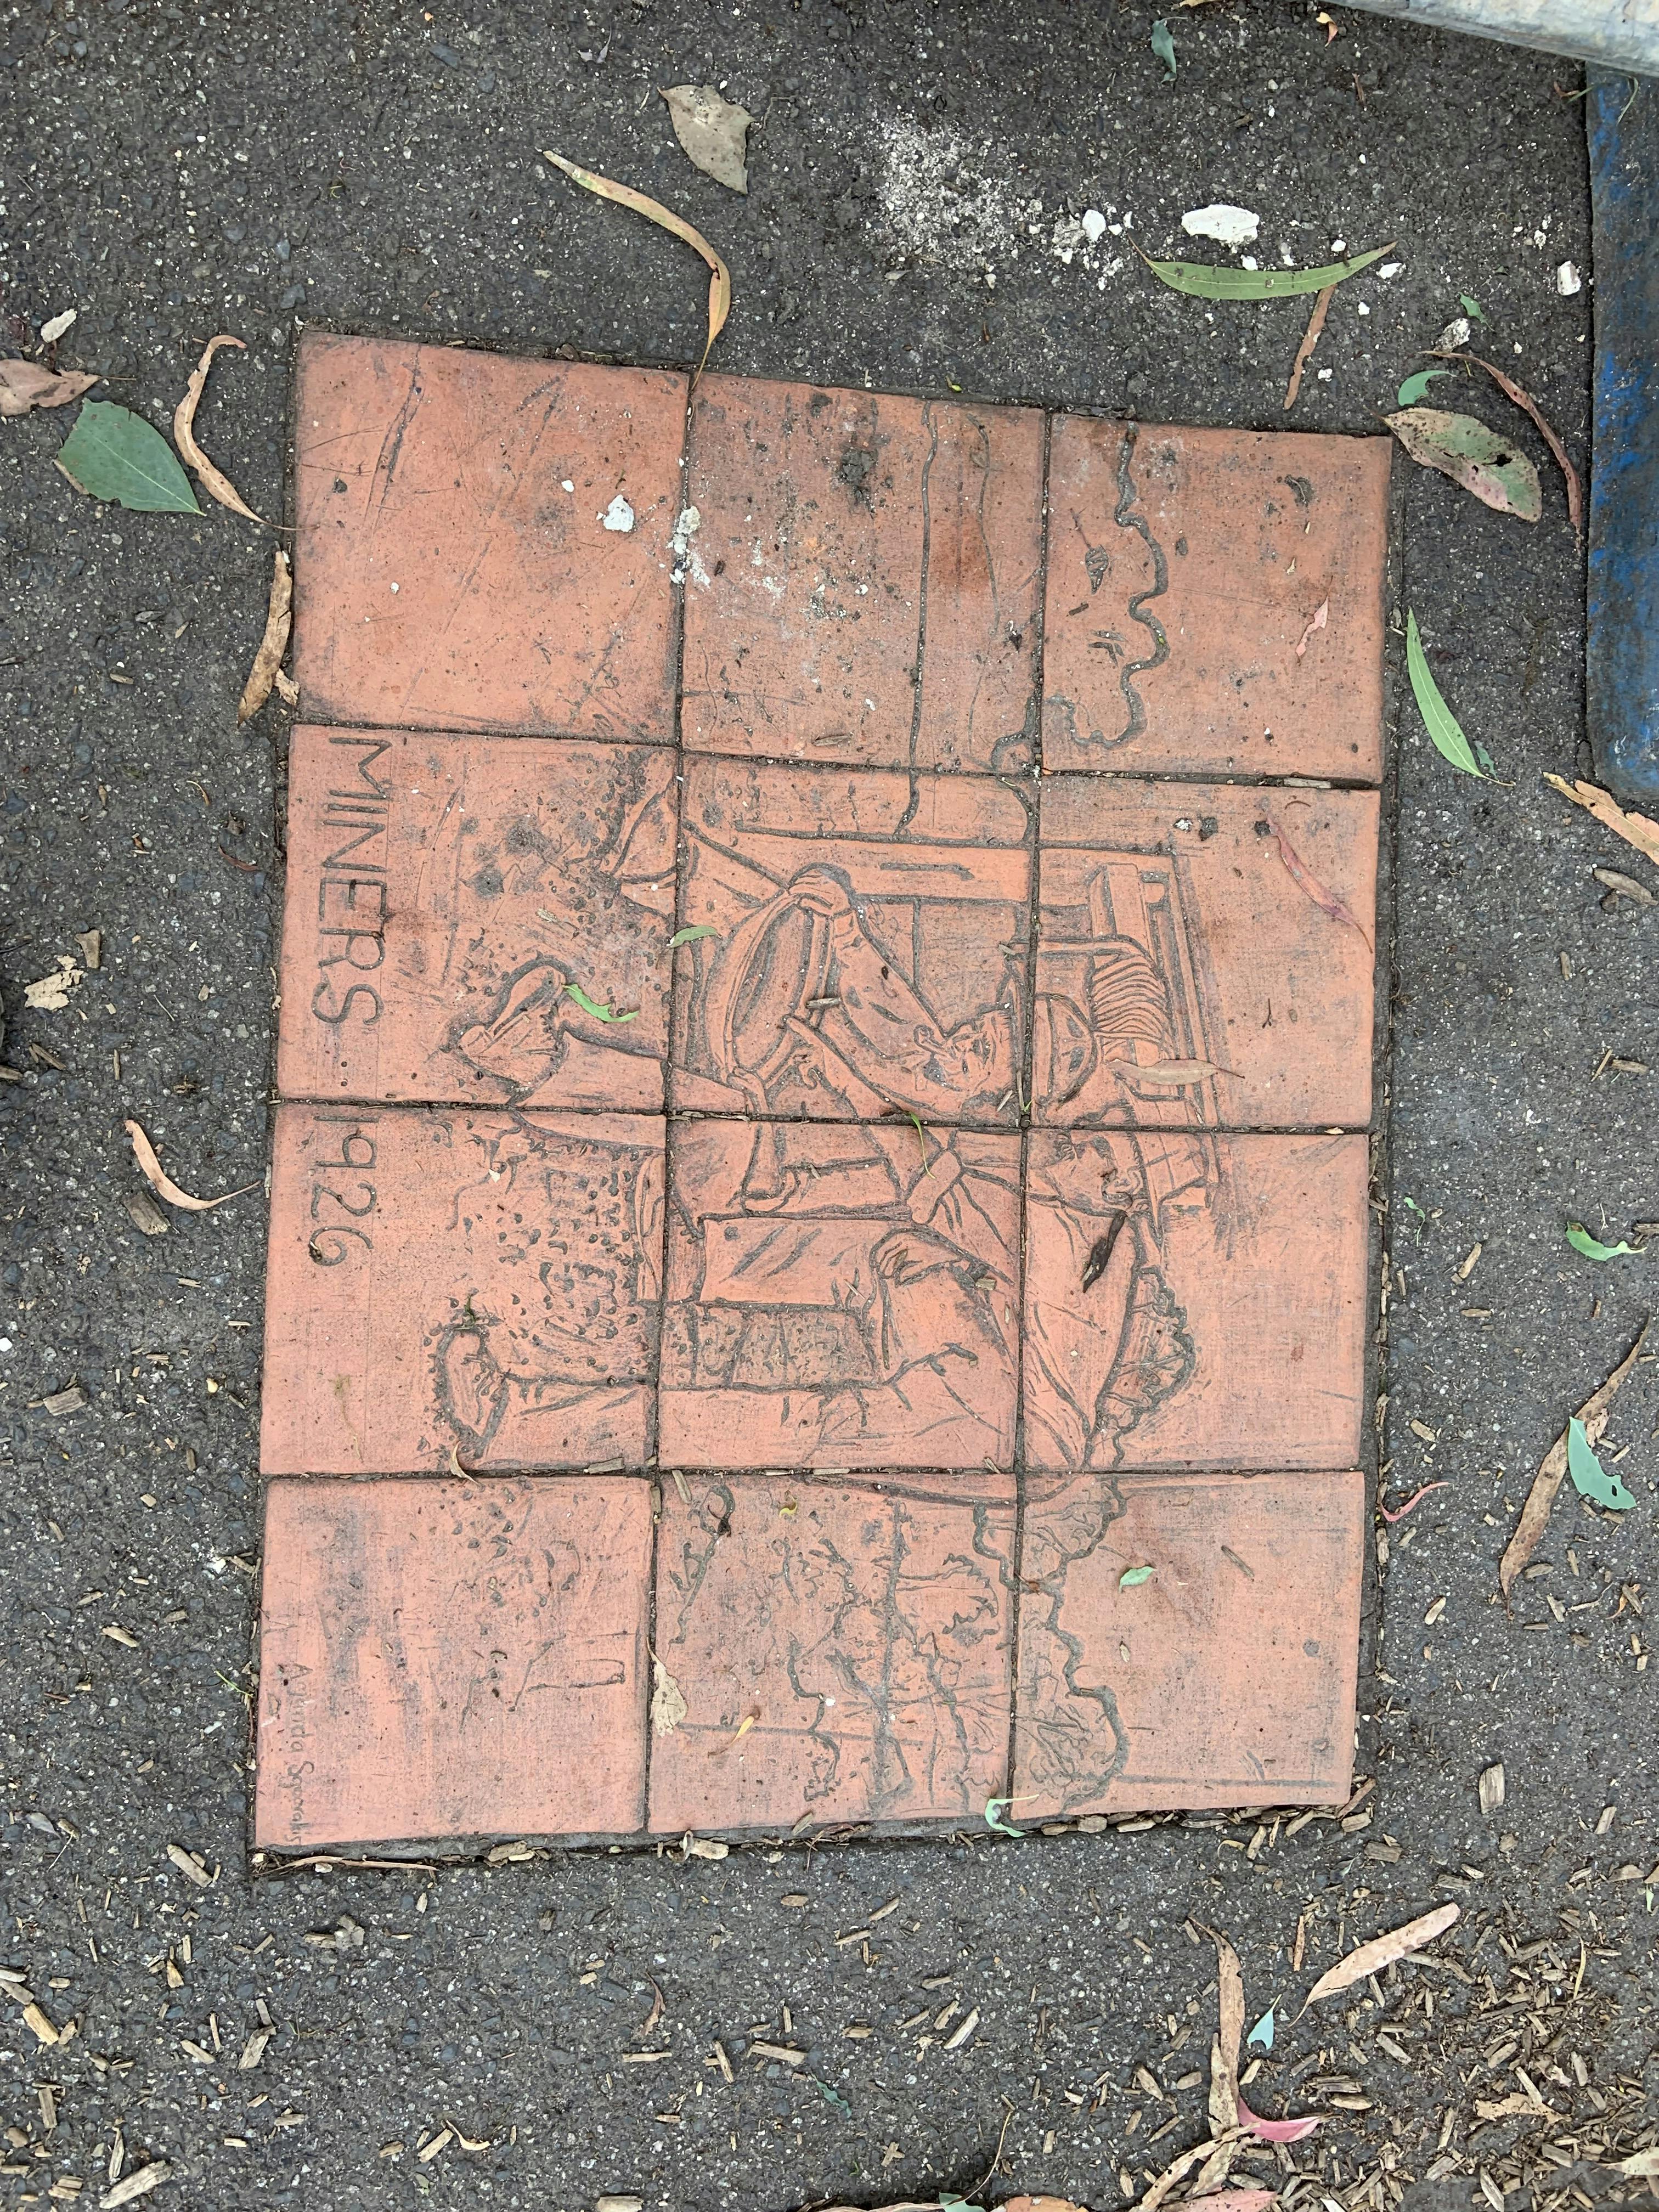 Mosaic tiles from the old play space